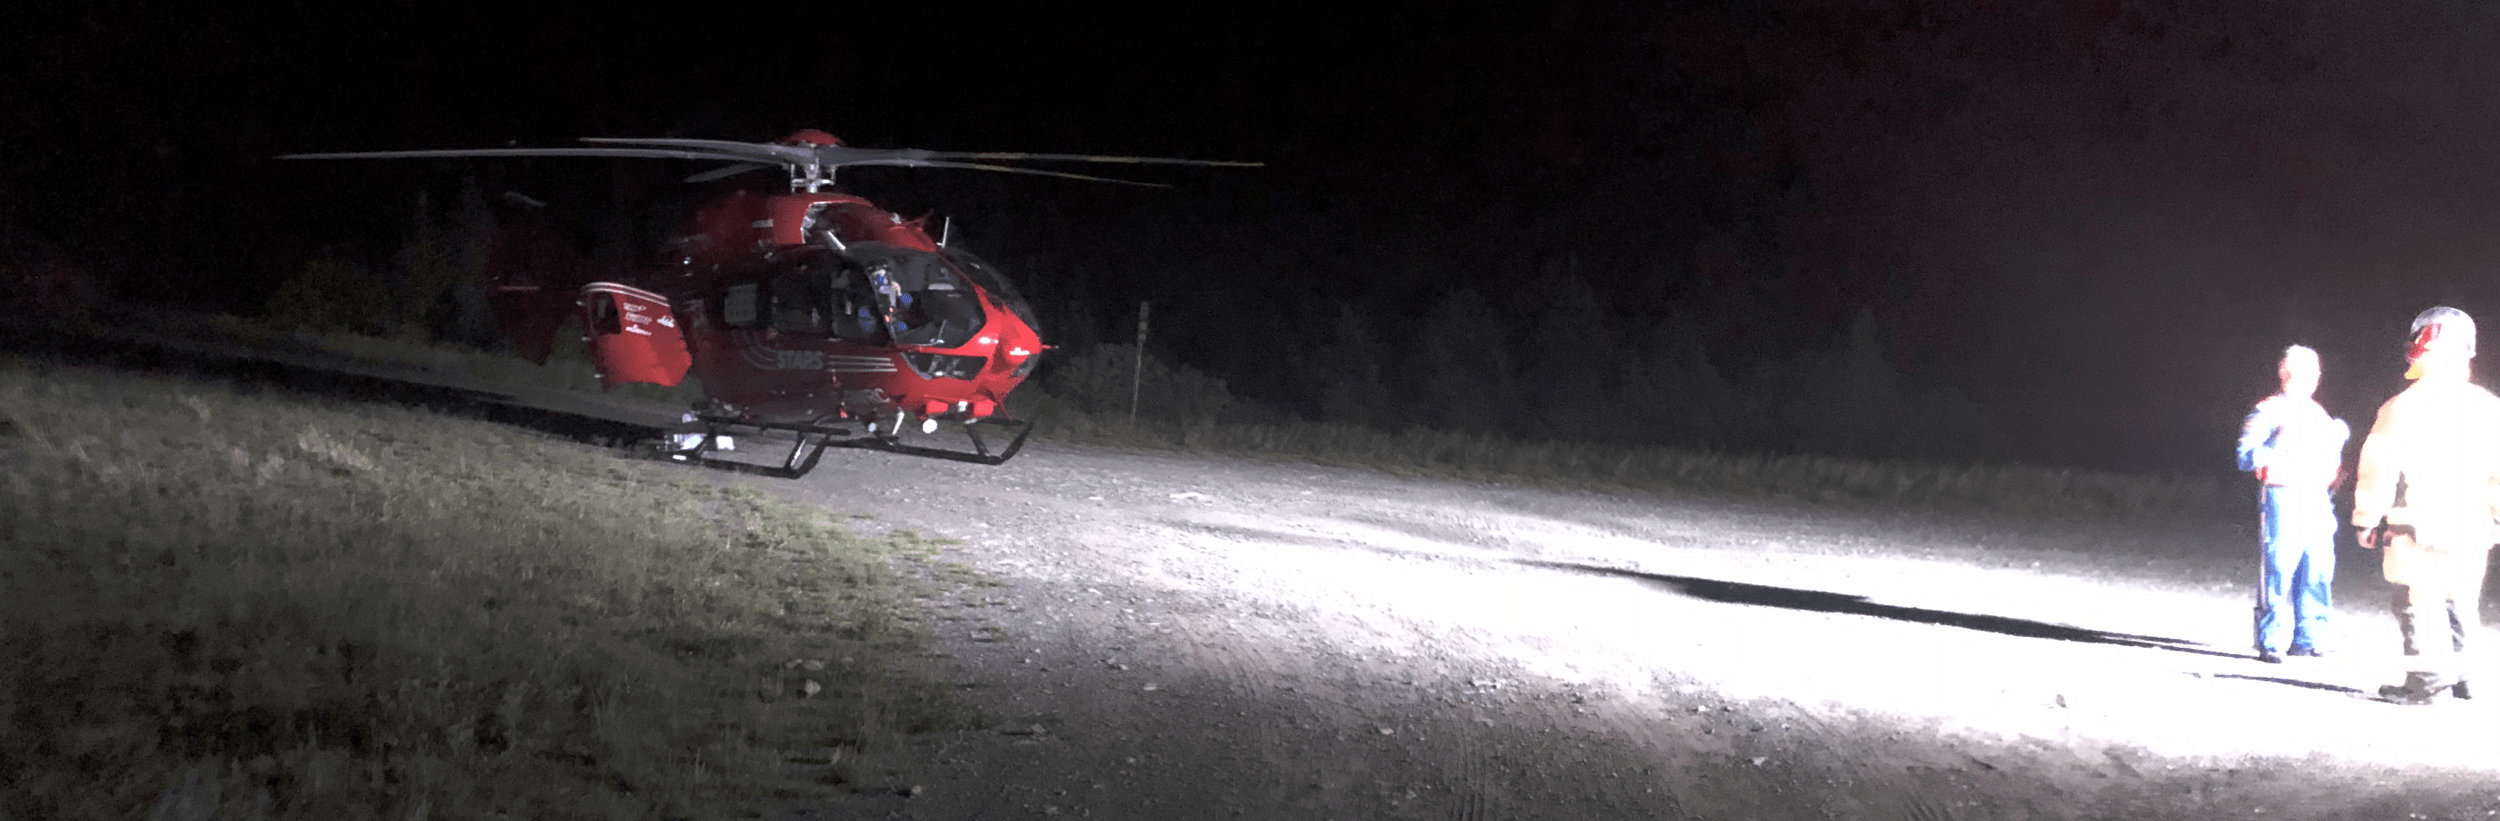 A STARS helicopter rescue at night on a mountain road